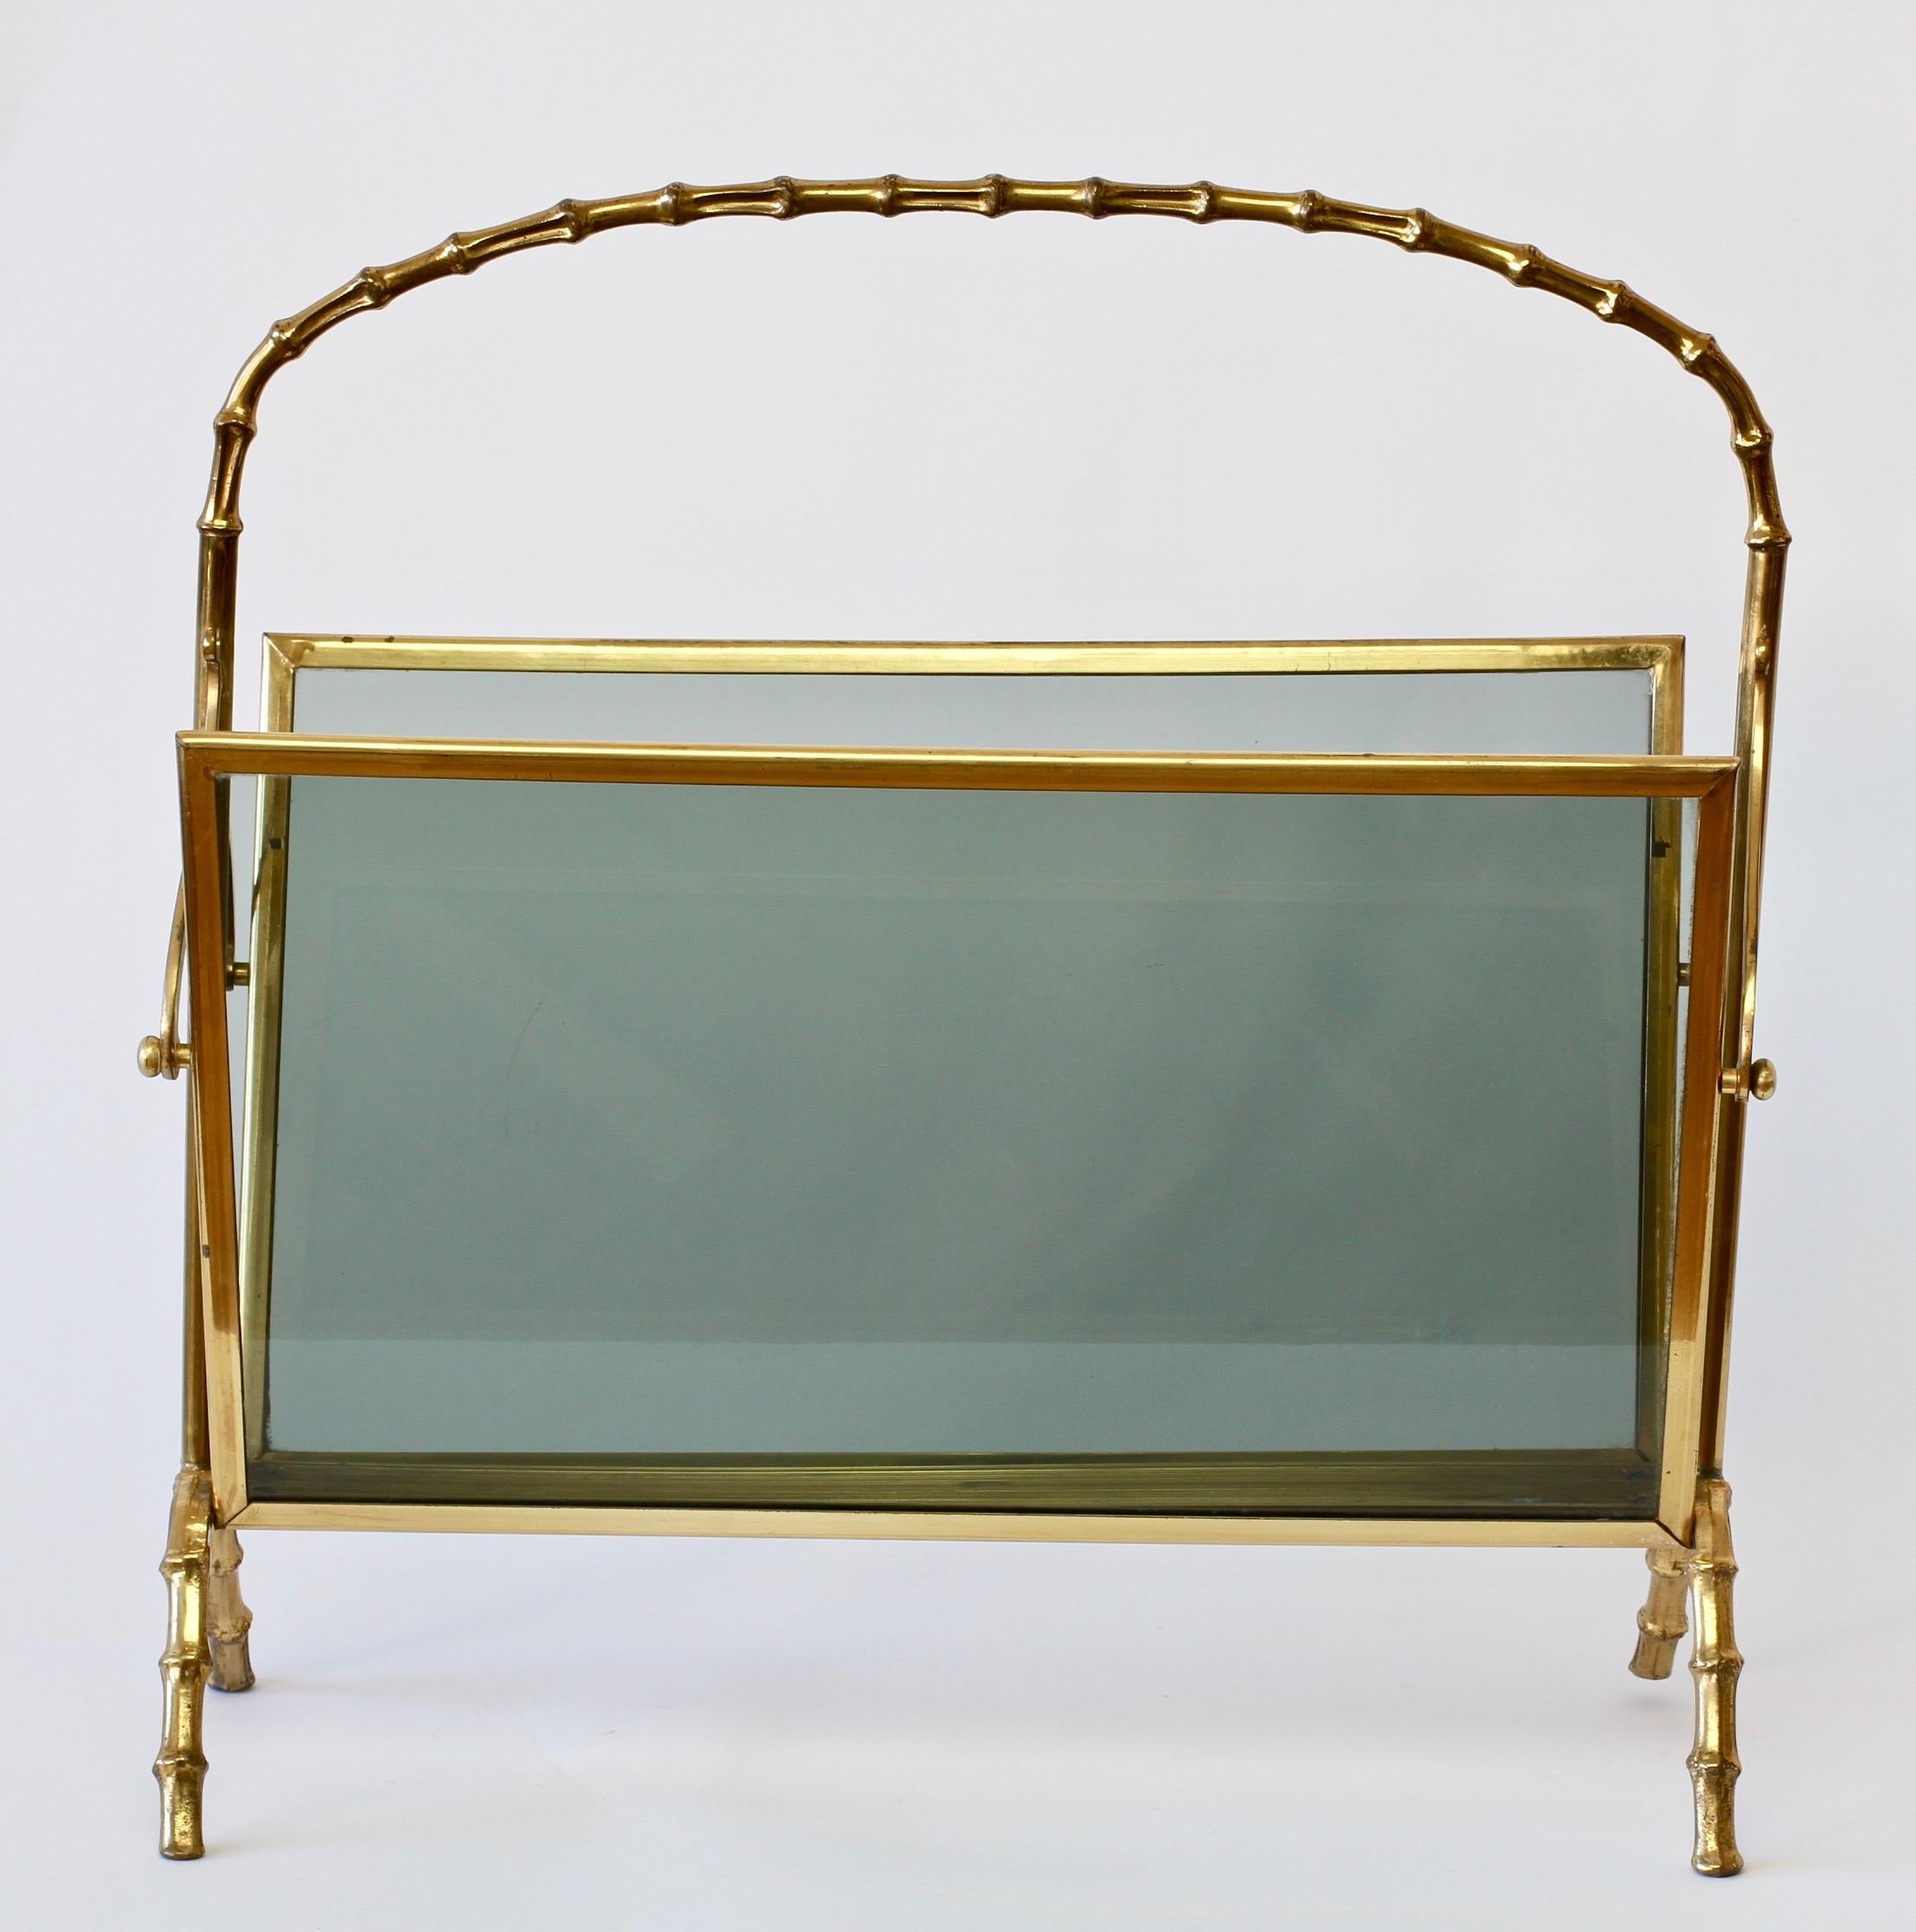 Maison Baguès Attributed Cast Brass Faux Bamboo Magazine Rack or Newspaper Stand For Sale 1